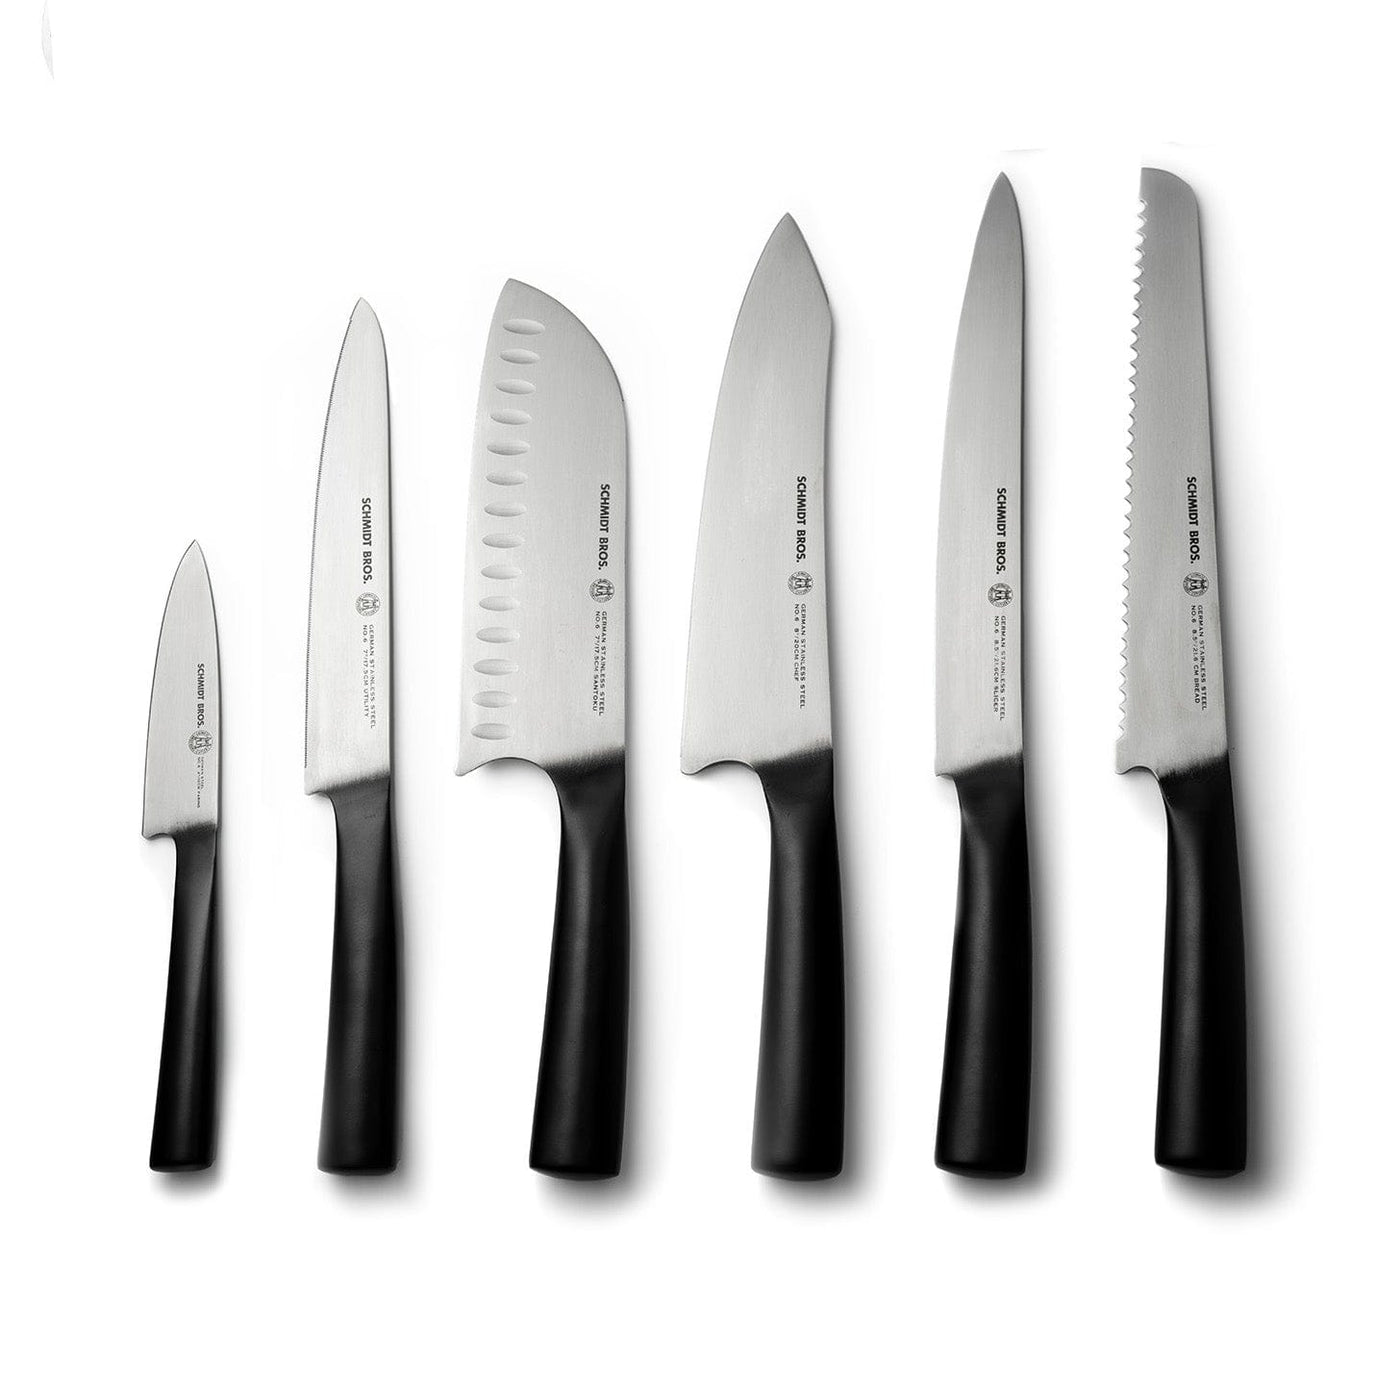 Kitchen Knife Set Chef Knives High Carbon Stainless Steel Knife